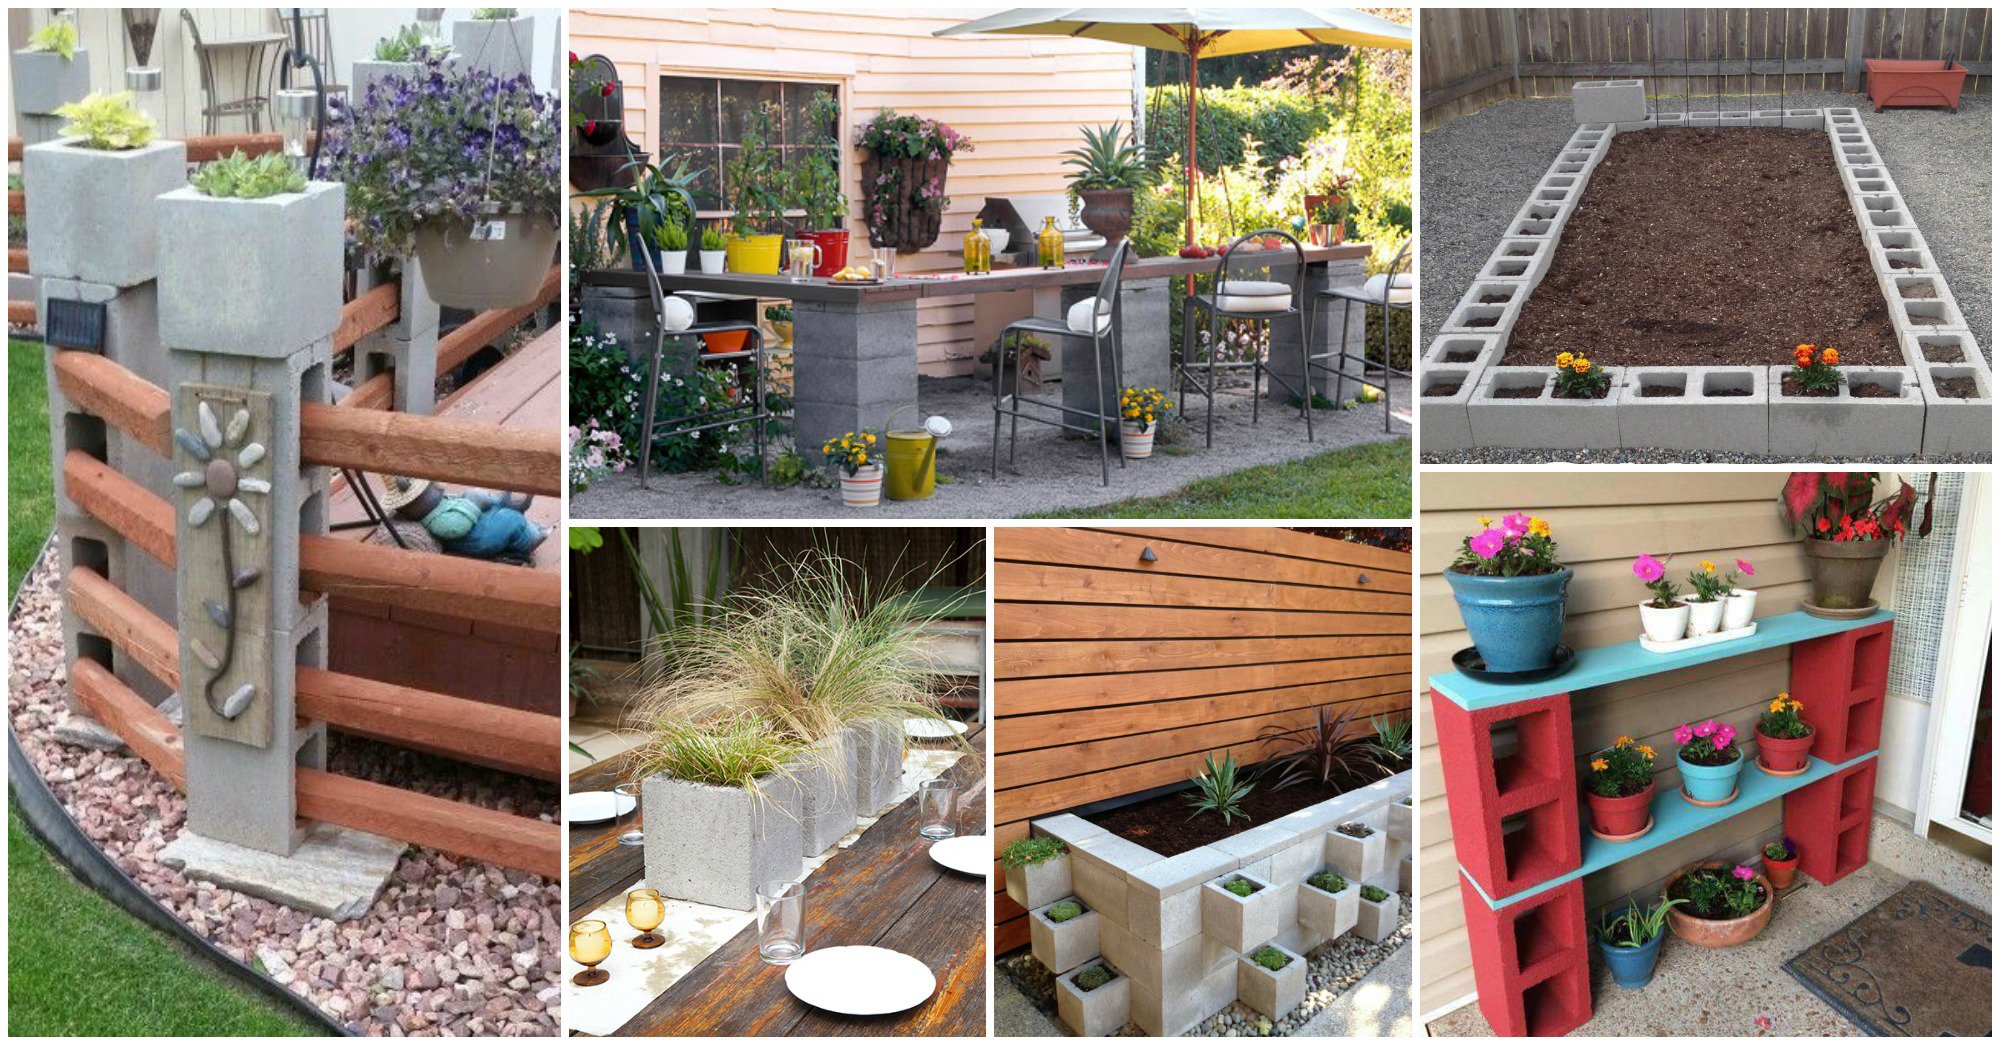 10 Amazing Cinder Block Projects to Make for Your Backyard - Ideas to Love